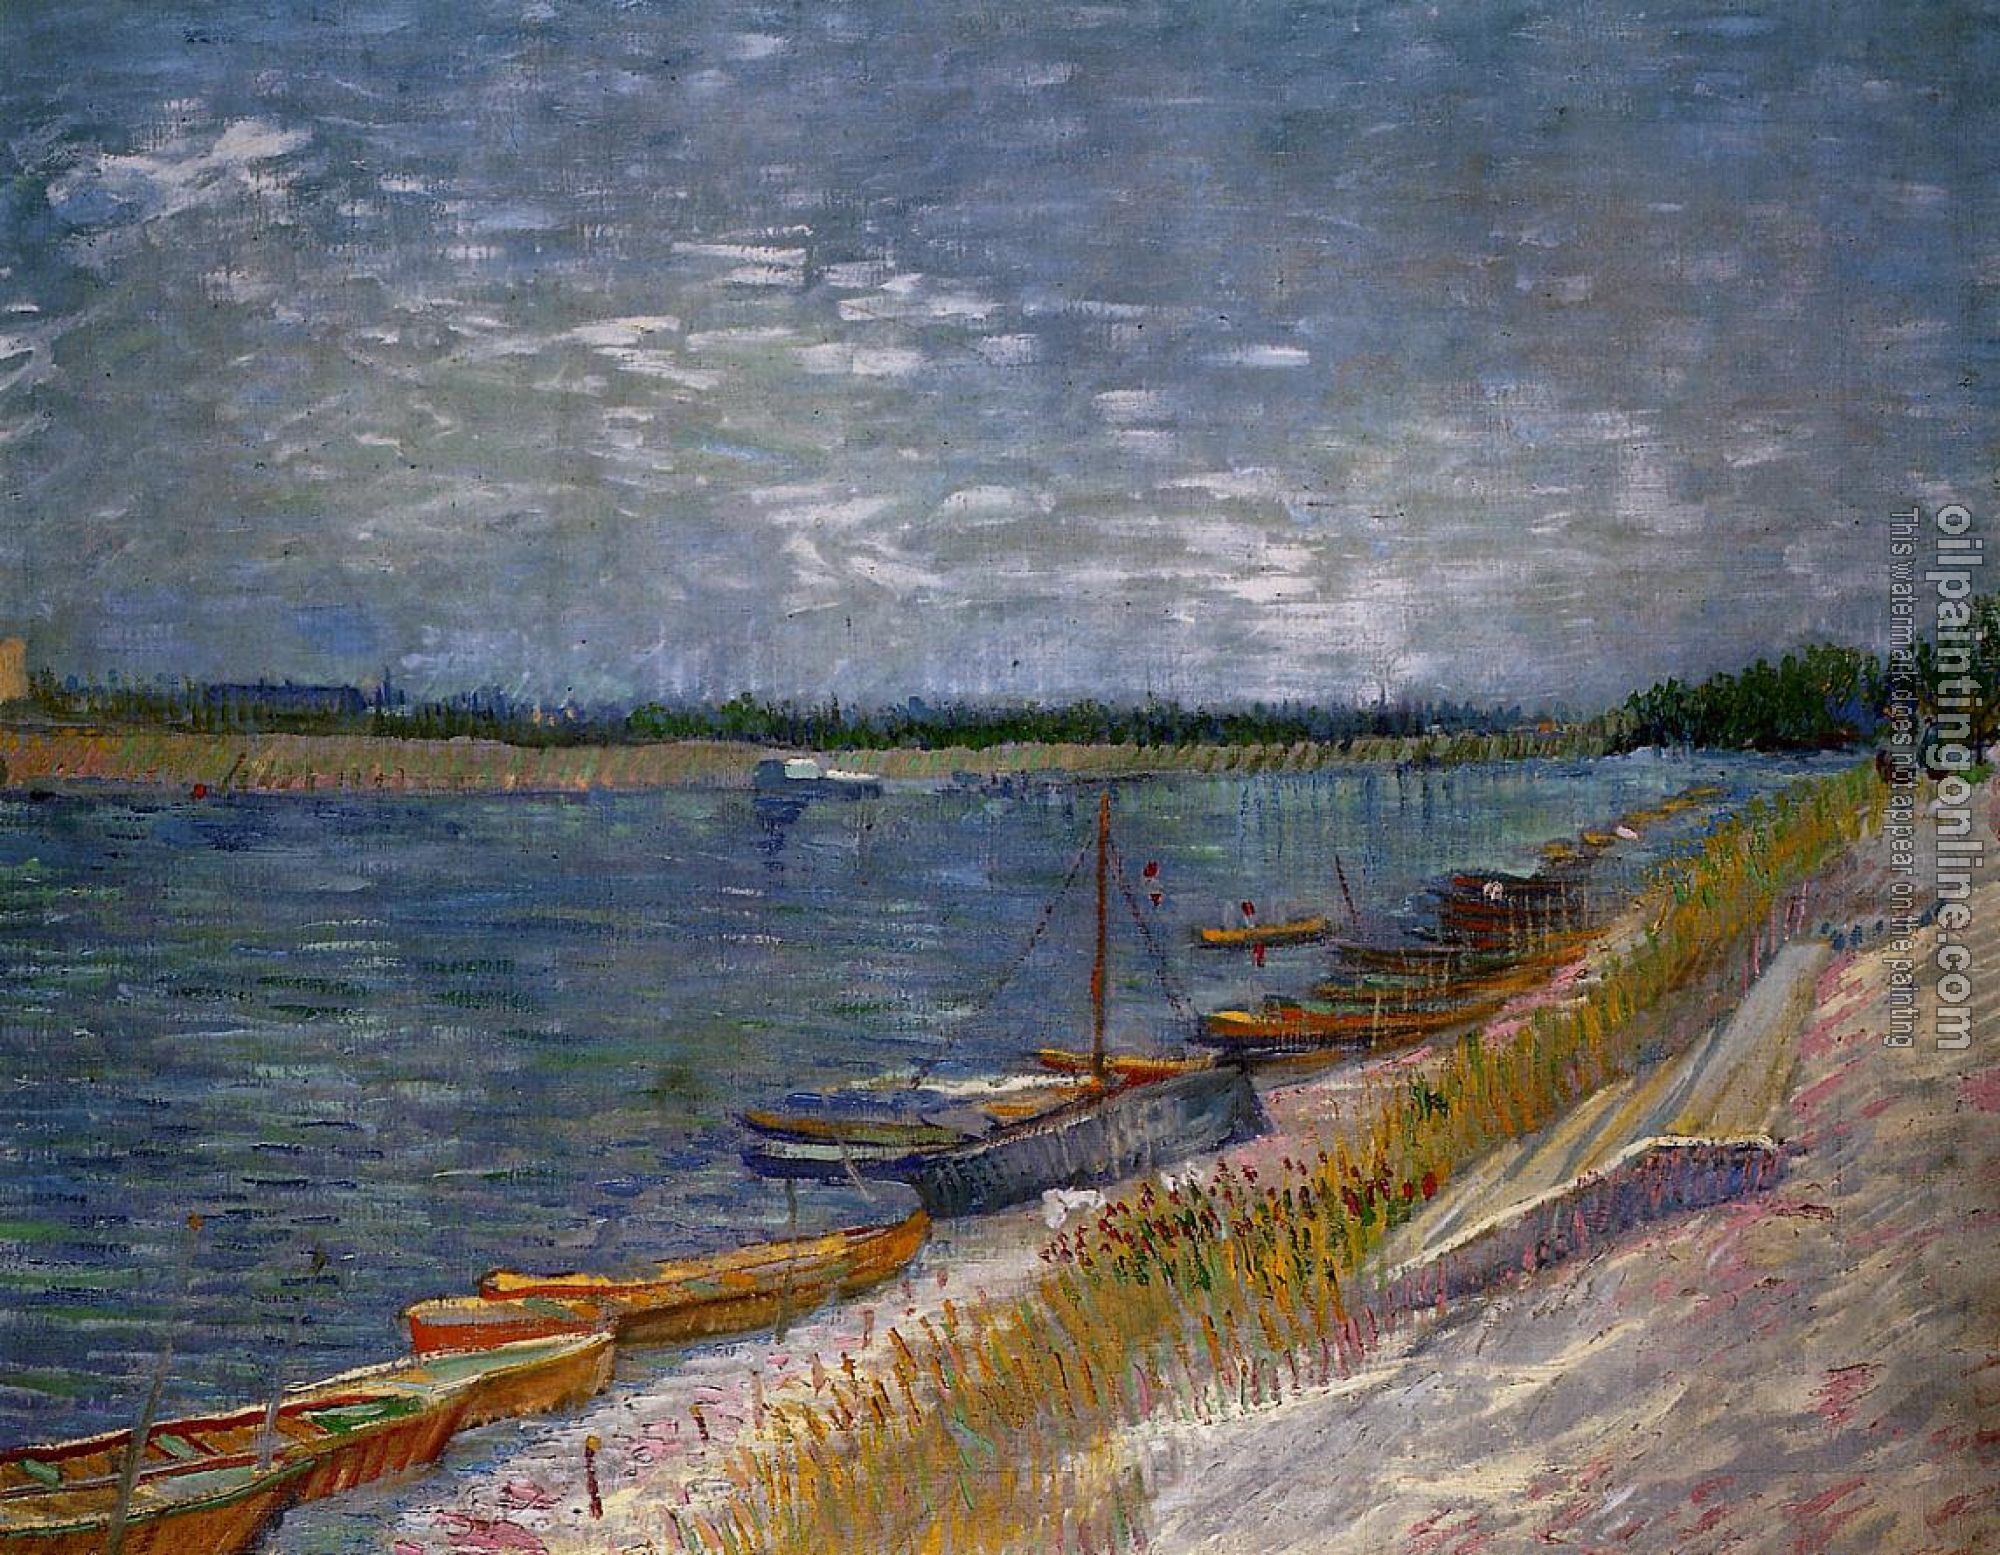 Gogh, Vincent van - View of a River with Rowing Boats